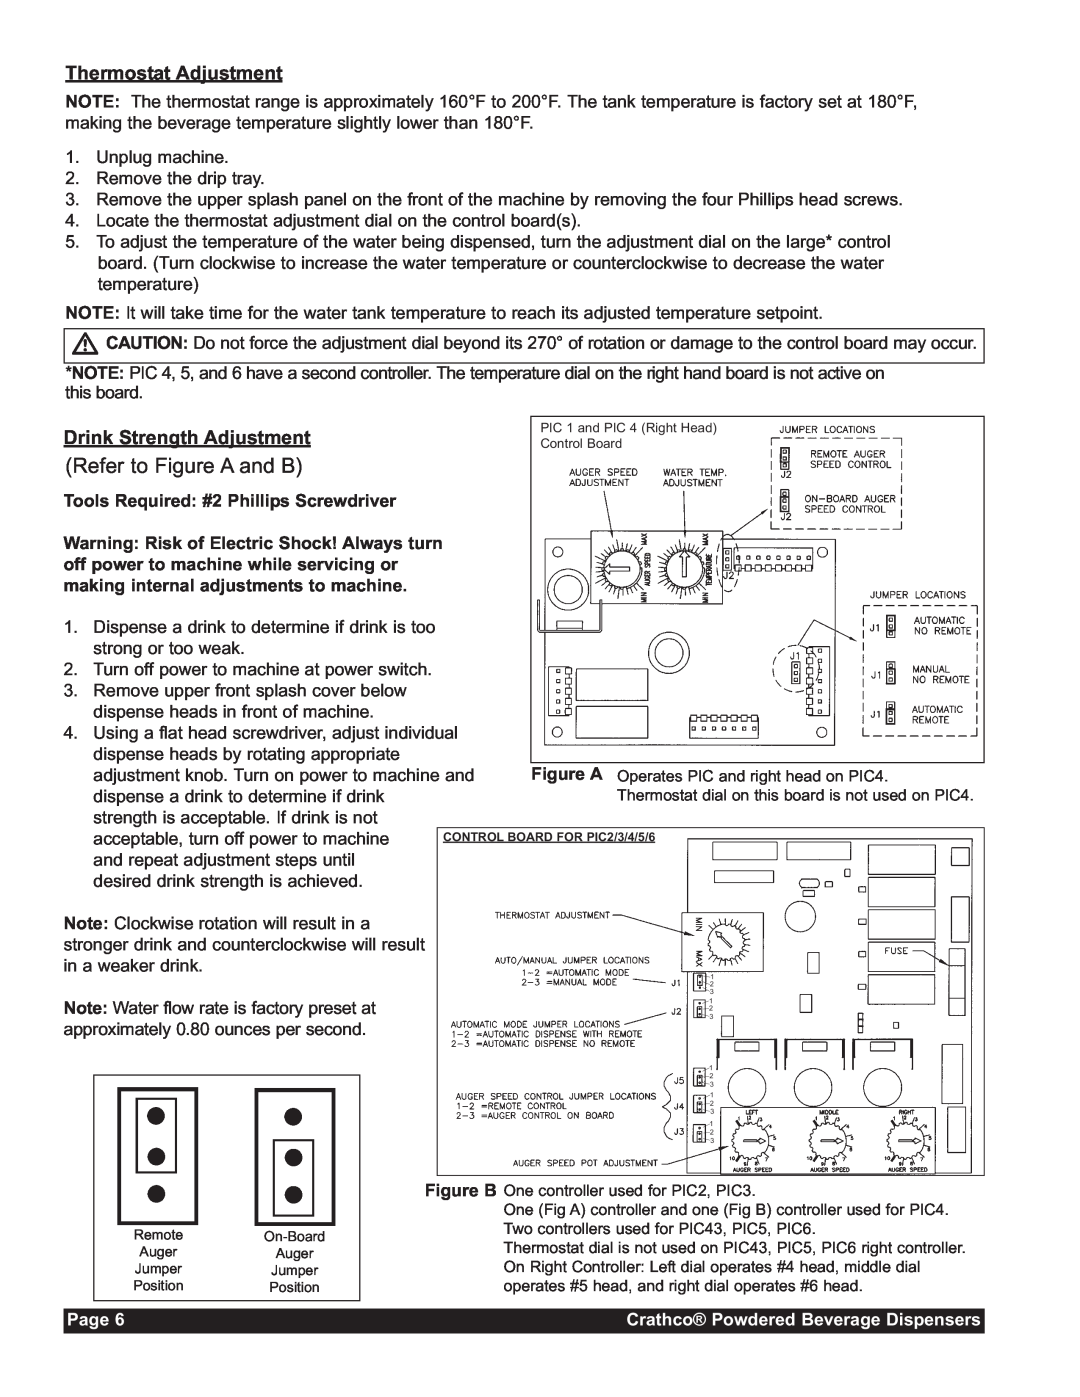 Grindmaster CC-302-20 service manual Refer to Figure A and B, Thermostat Adjustment, Drink Strength Adjustment, Page 